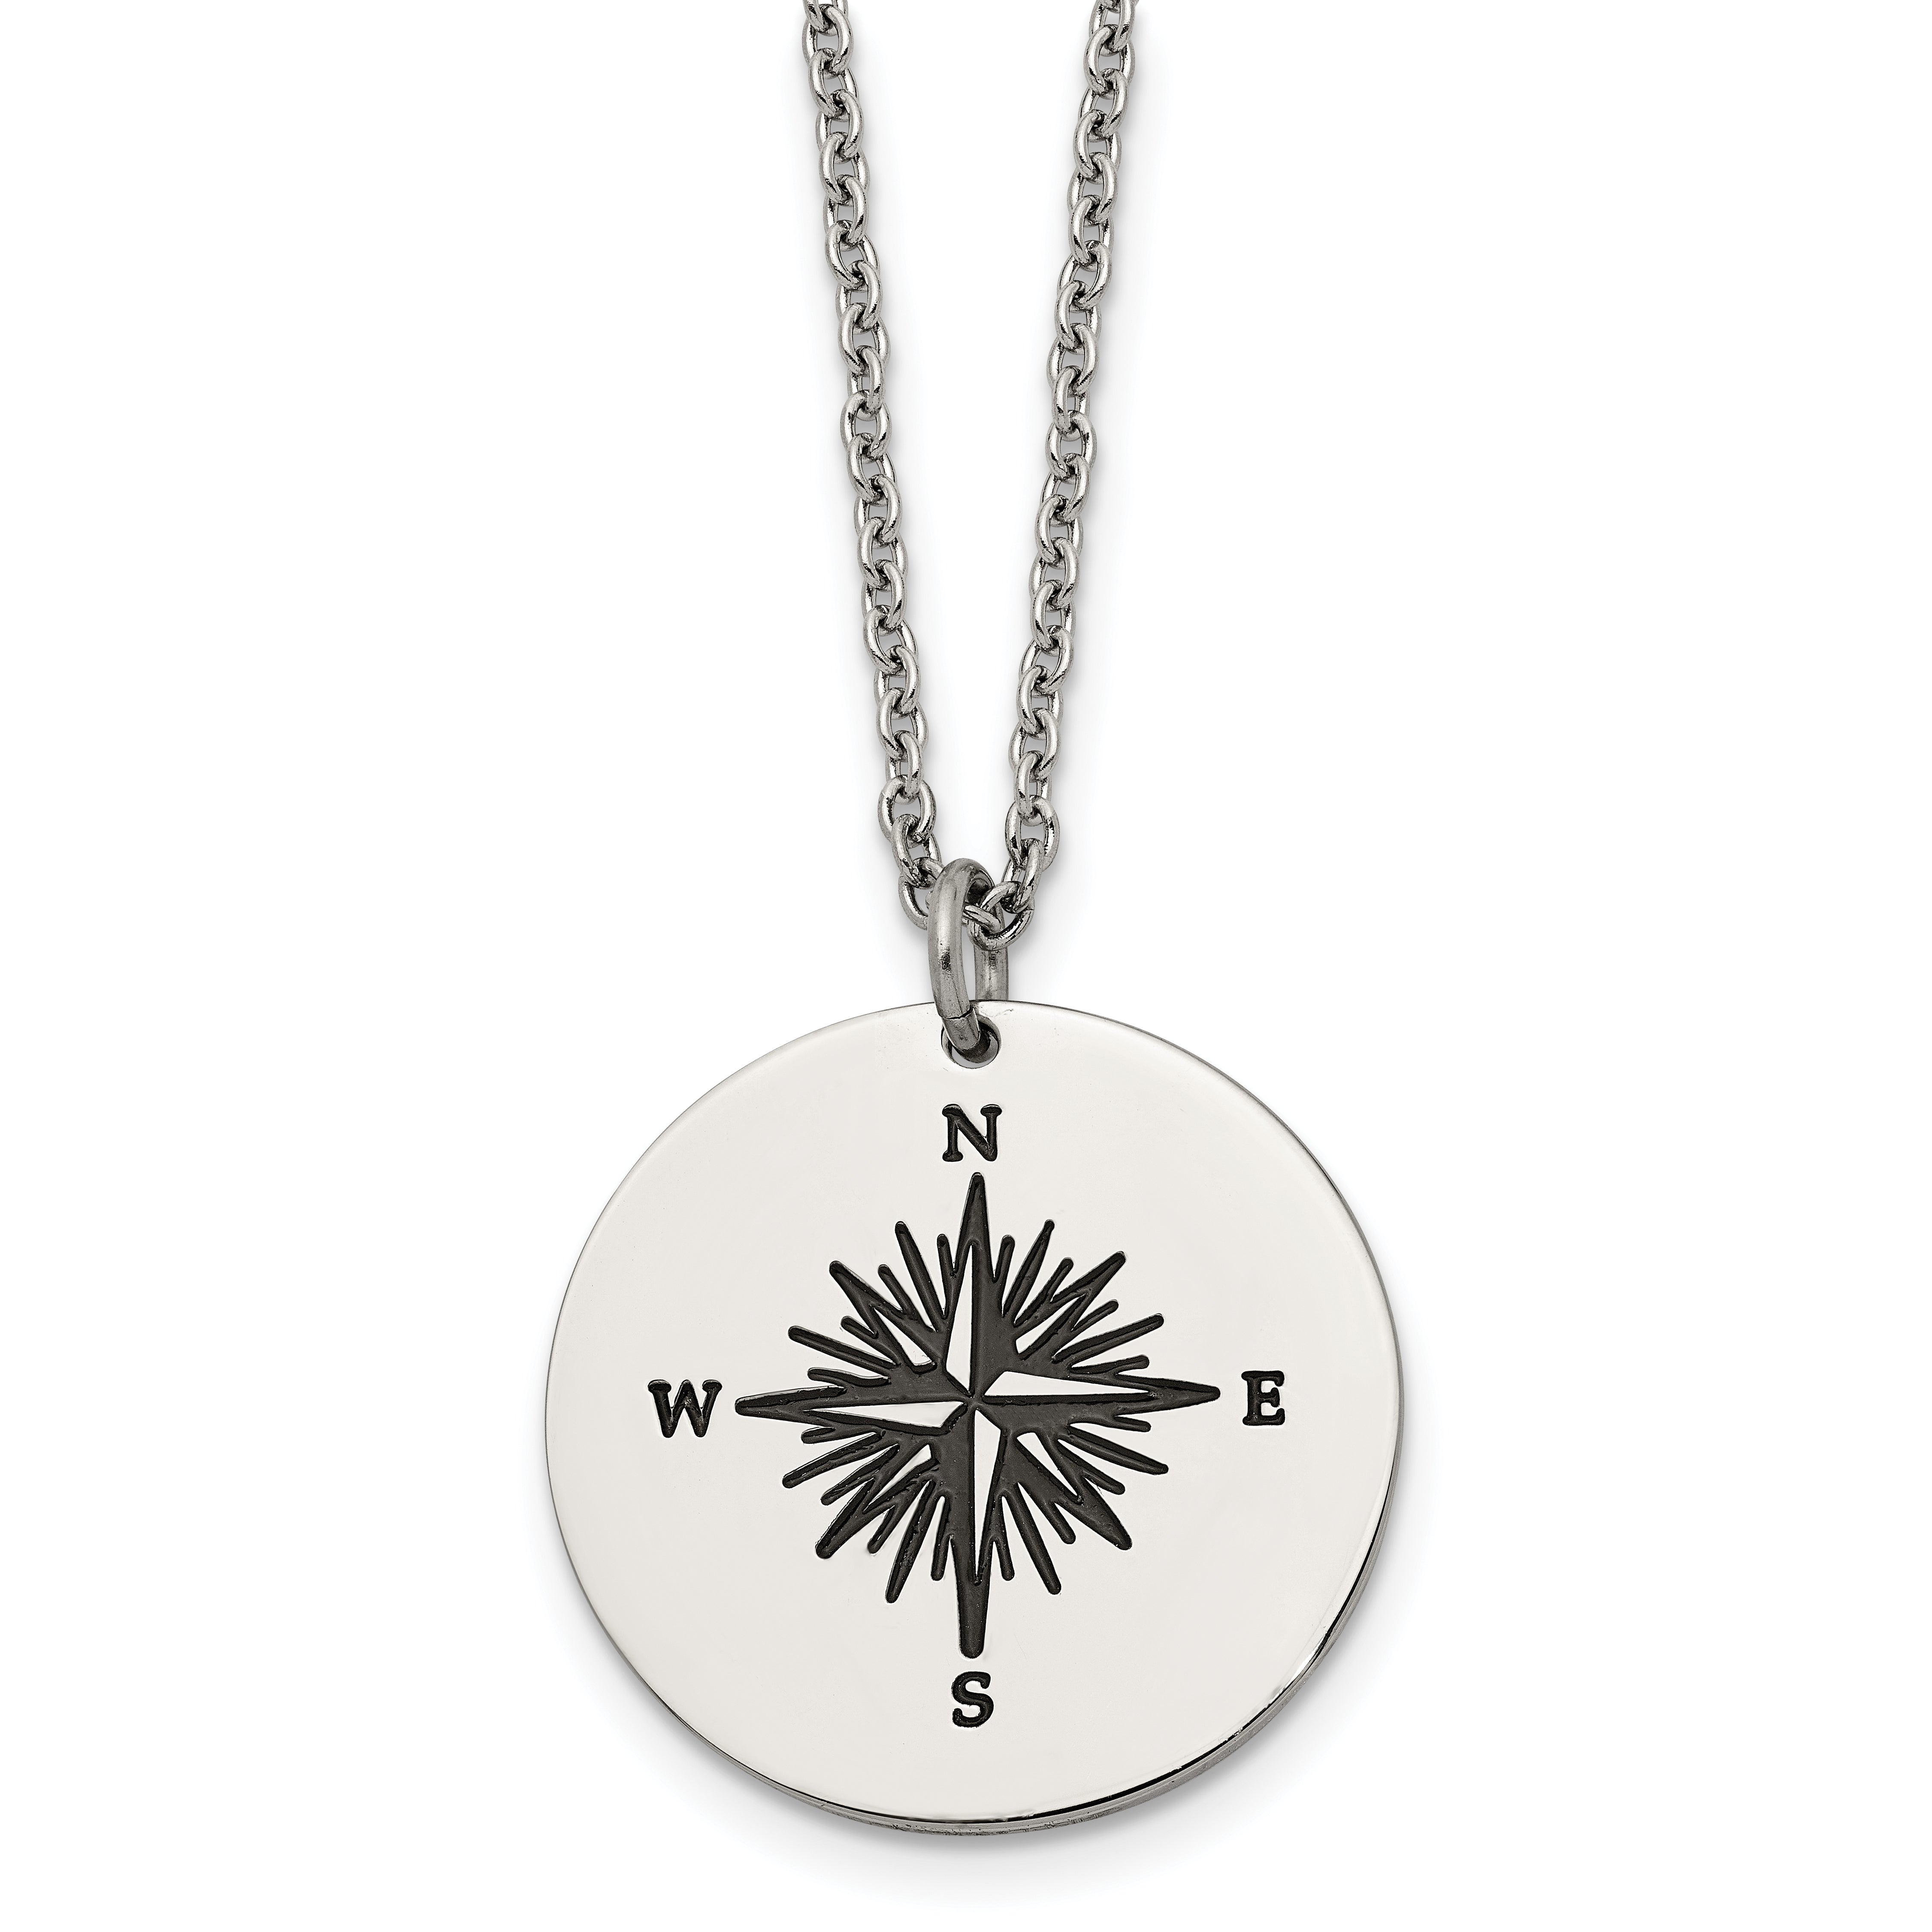 Chisel Stainless Steel Polished Enameled NOT ALL WHO WANDER ARE LOST Compass Pendant on a 22in Cable Chain Necklace